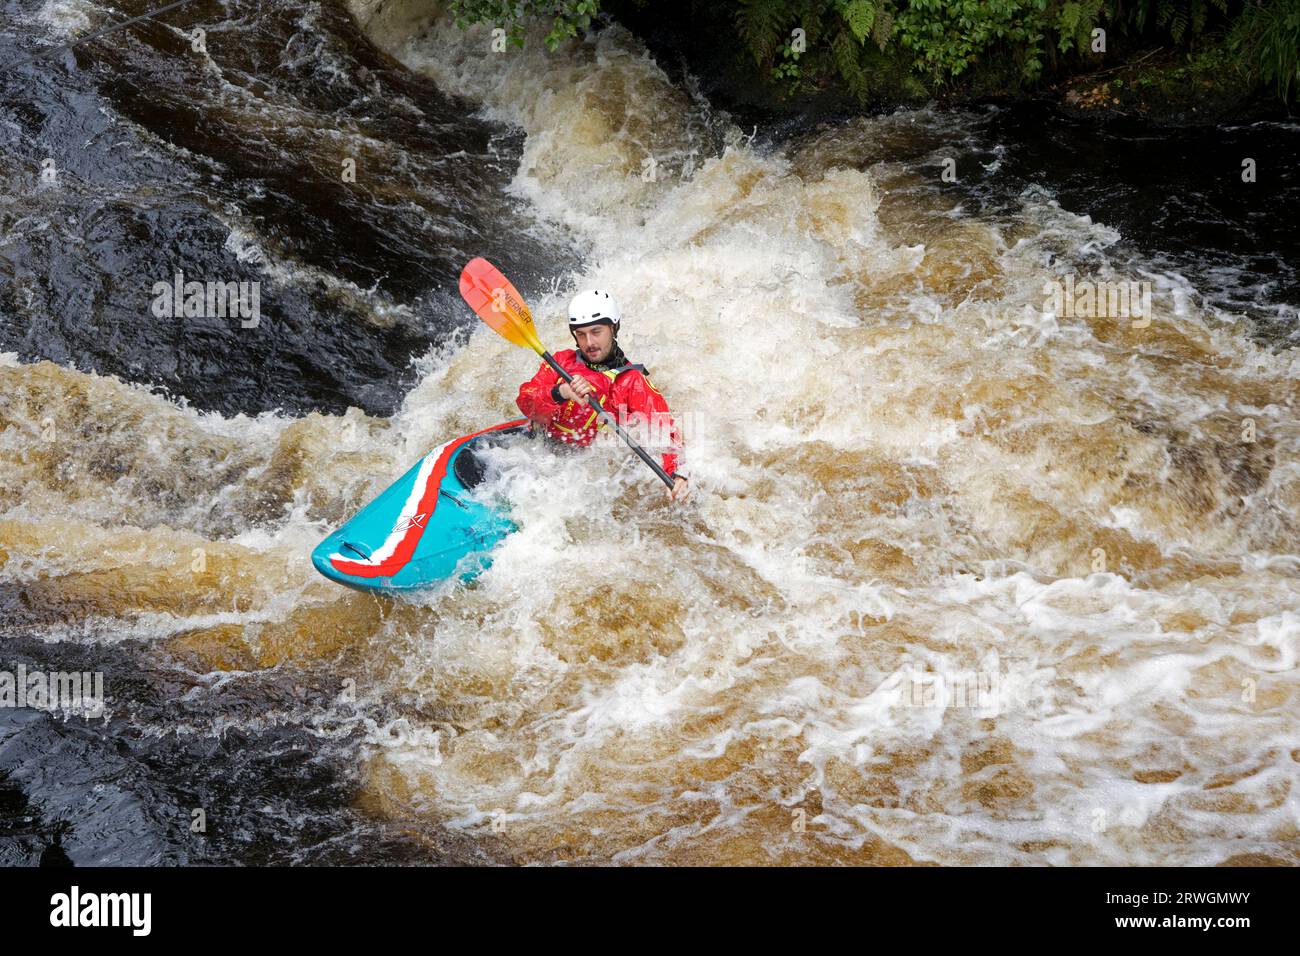 Canoeist in red jacket and crash helmet in blue canoe riding the rapids Whitewater slalom canoeing  in River Tryweryn at he National Whitewater Centre Stock Photo